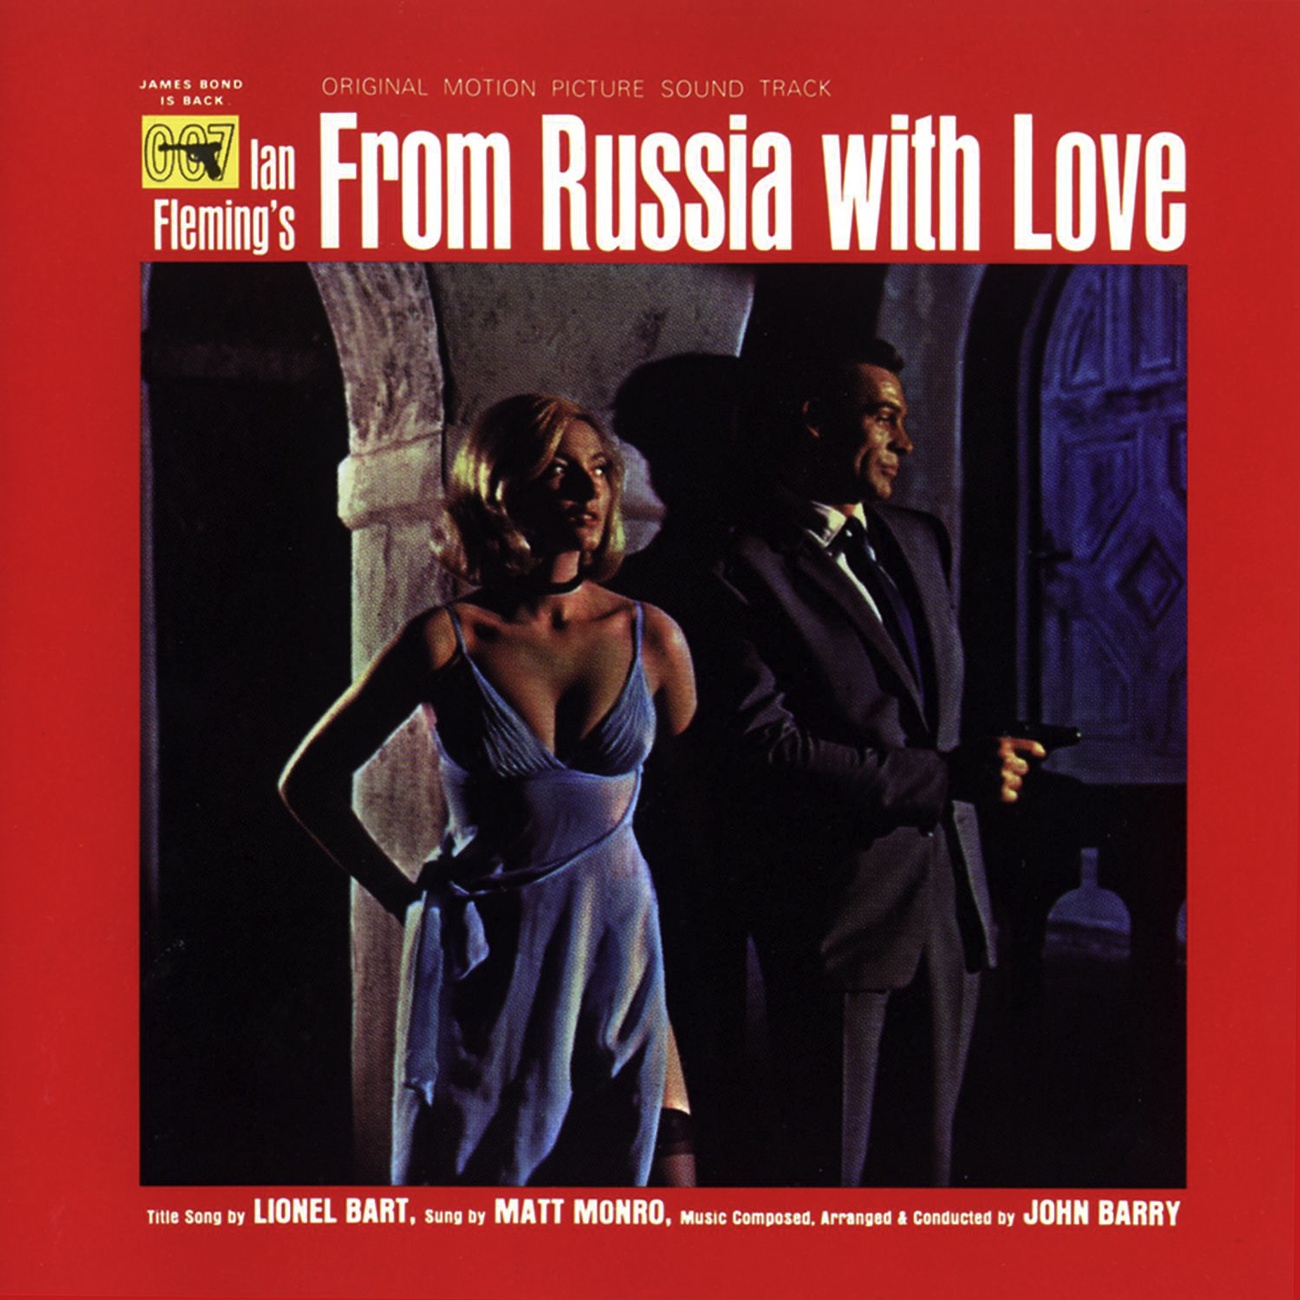 From Russia With Love - Soundtrack